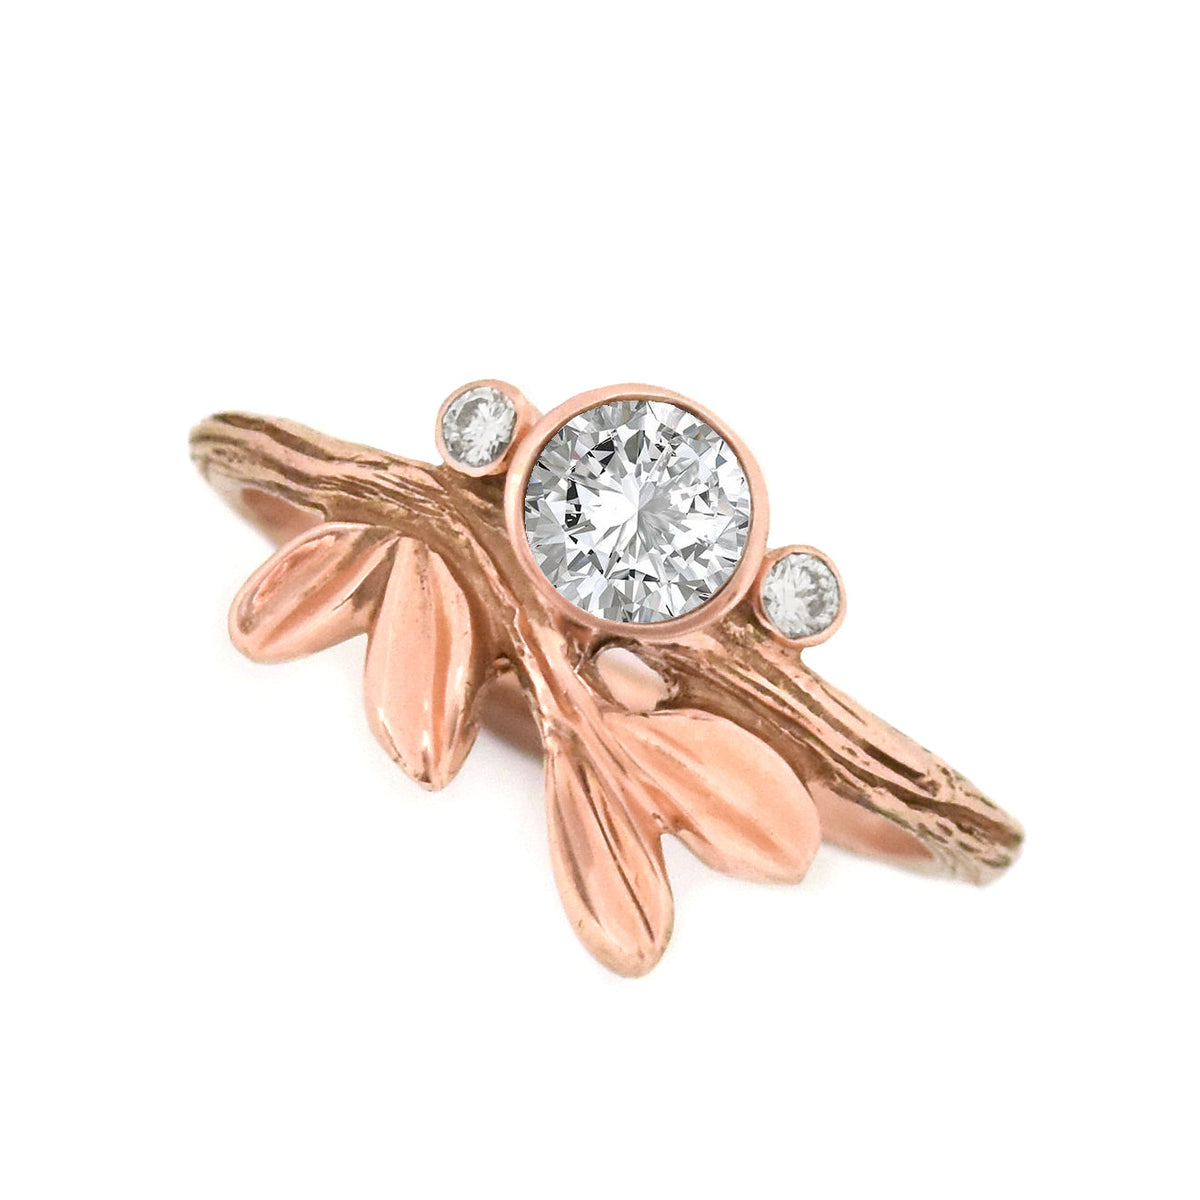 Gold Growing Love Diamond Twig Ring - your choice of 5mm stone & gold - Wedding Ring Recycled Diamond / 14K Rose Gold Recycled Diamond / 14K Yellow Gold 6309 - handmade by Beth Millner Jewelry